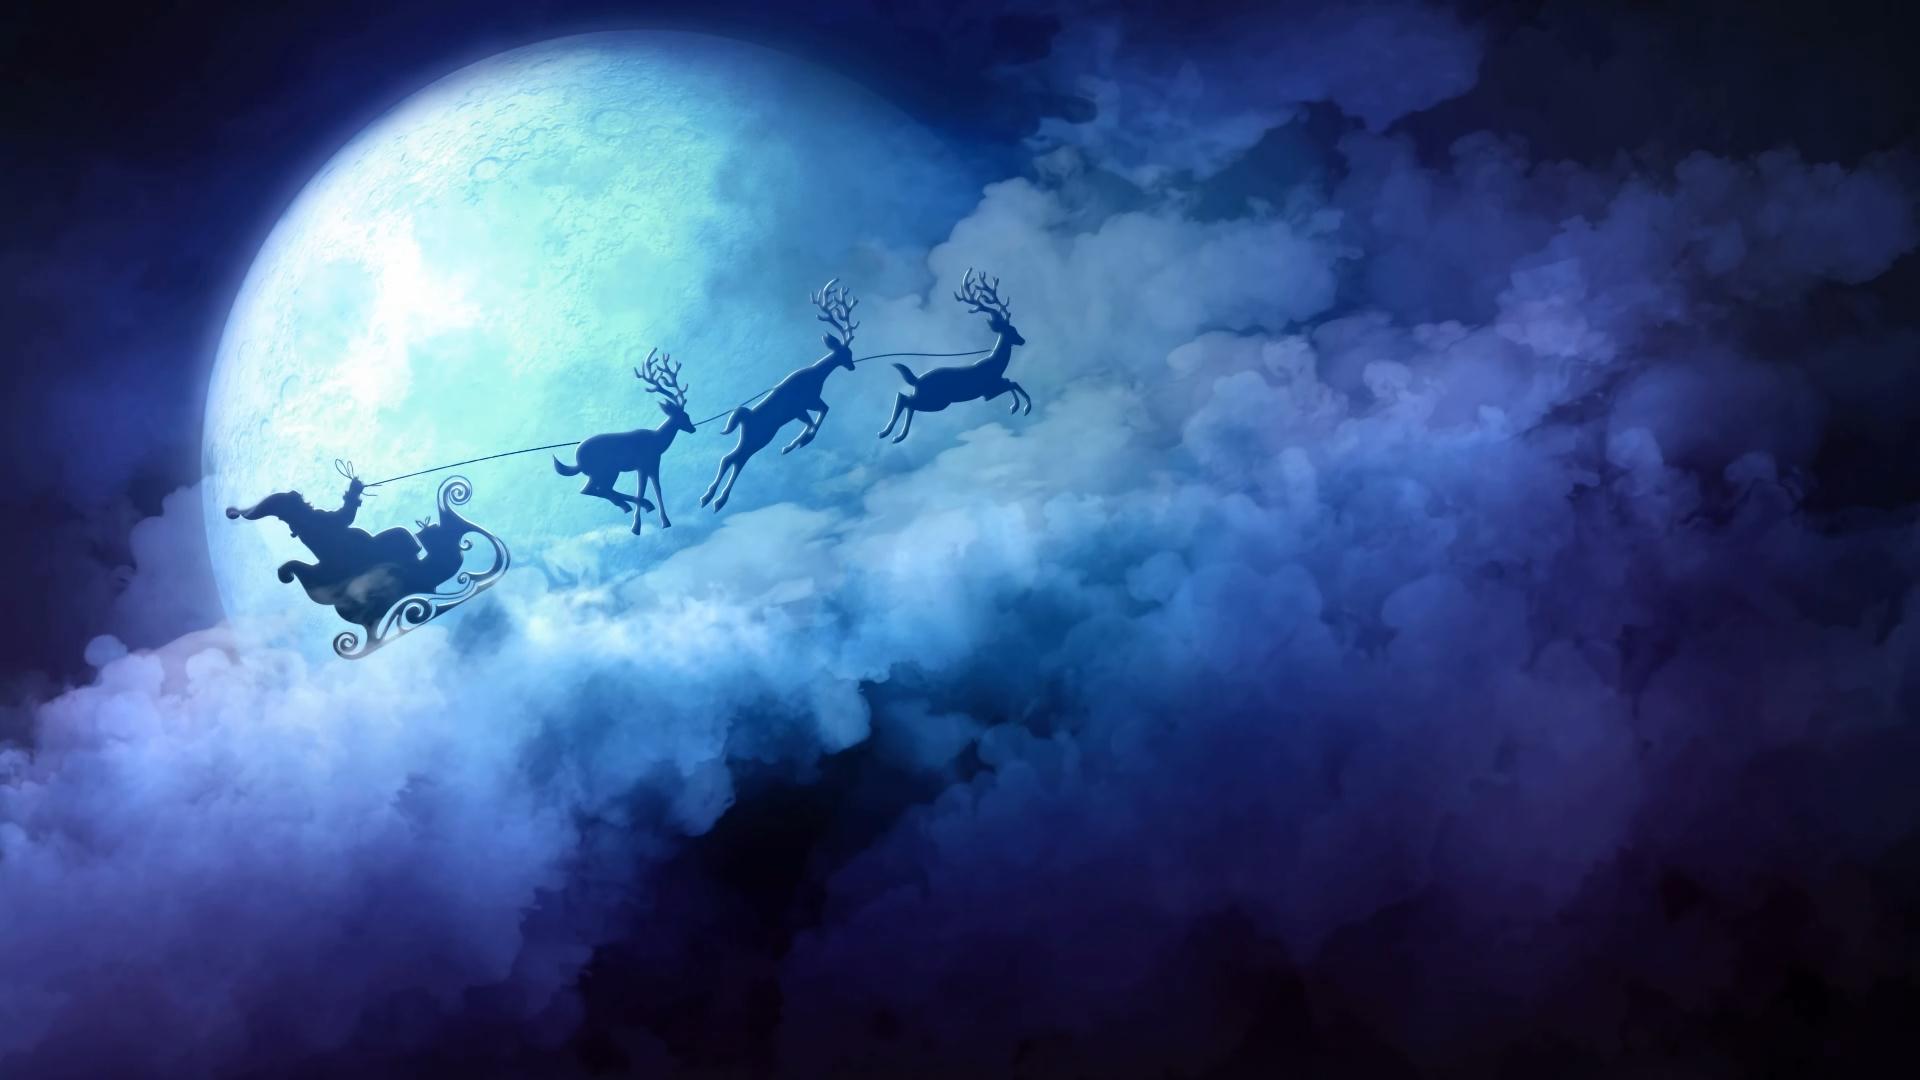 Animated Wallpaper For Your Christmas And Holiday Desktops Forum